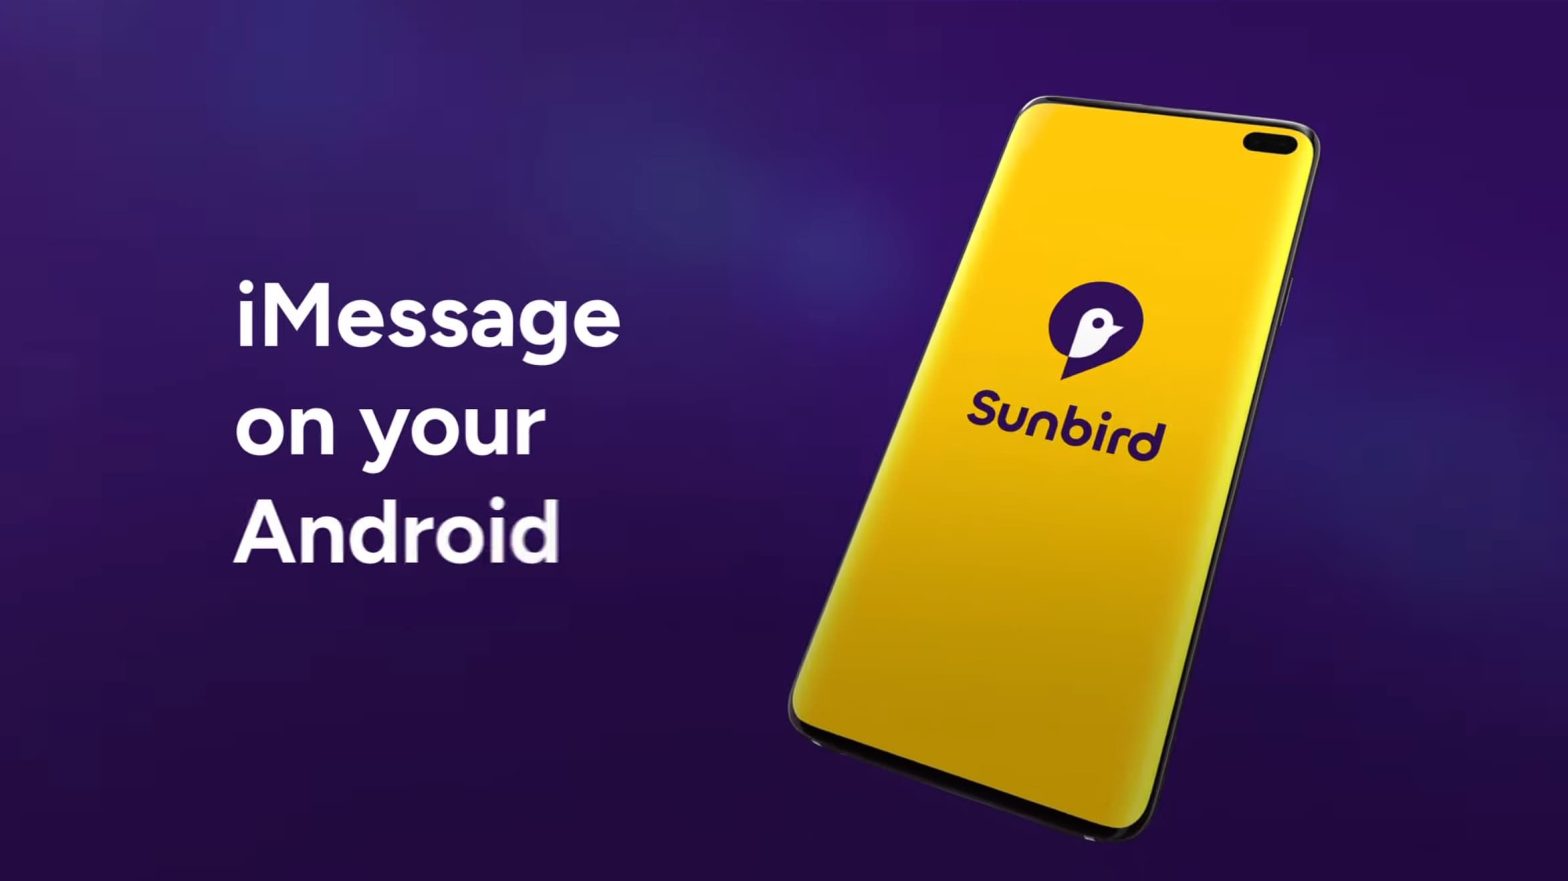 Sunbird beta to relaunch and rejuvenate iMessage for Android